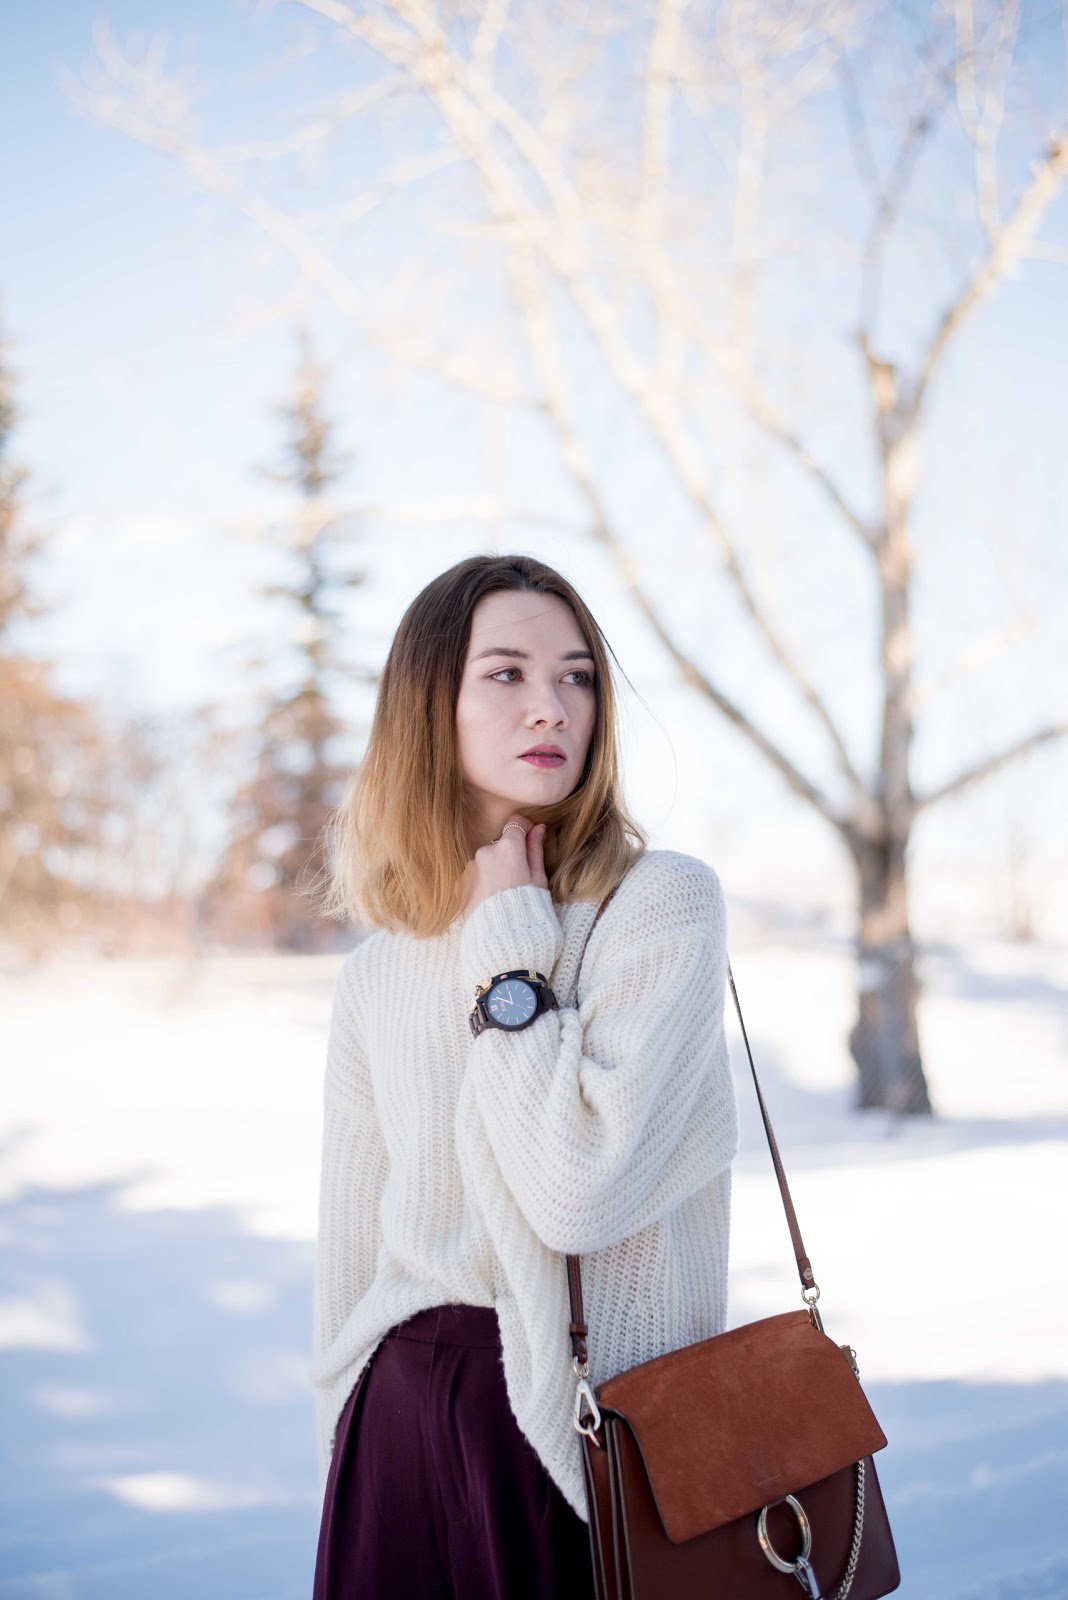 Jord watches, wood watches, uniqlo, minimalistic outfit, winter fashion, culottes